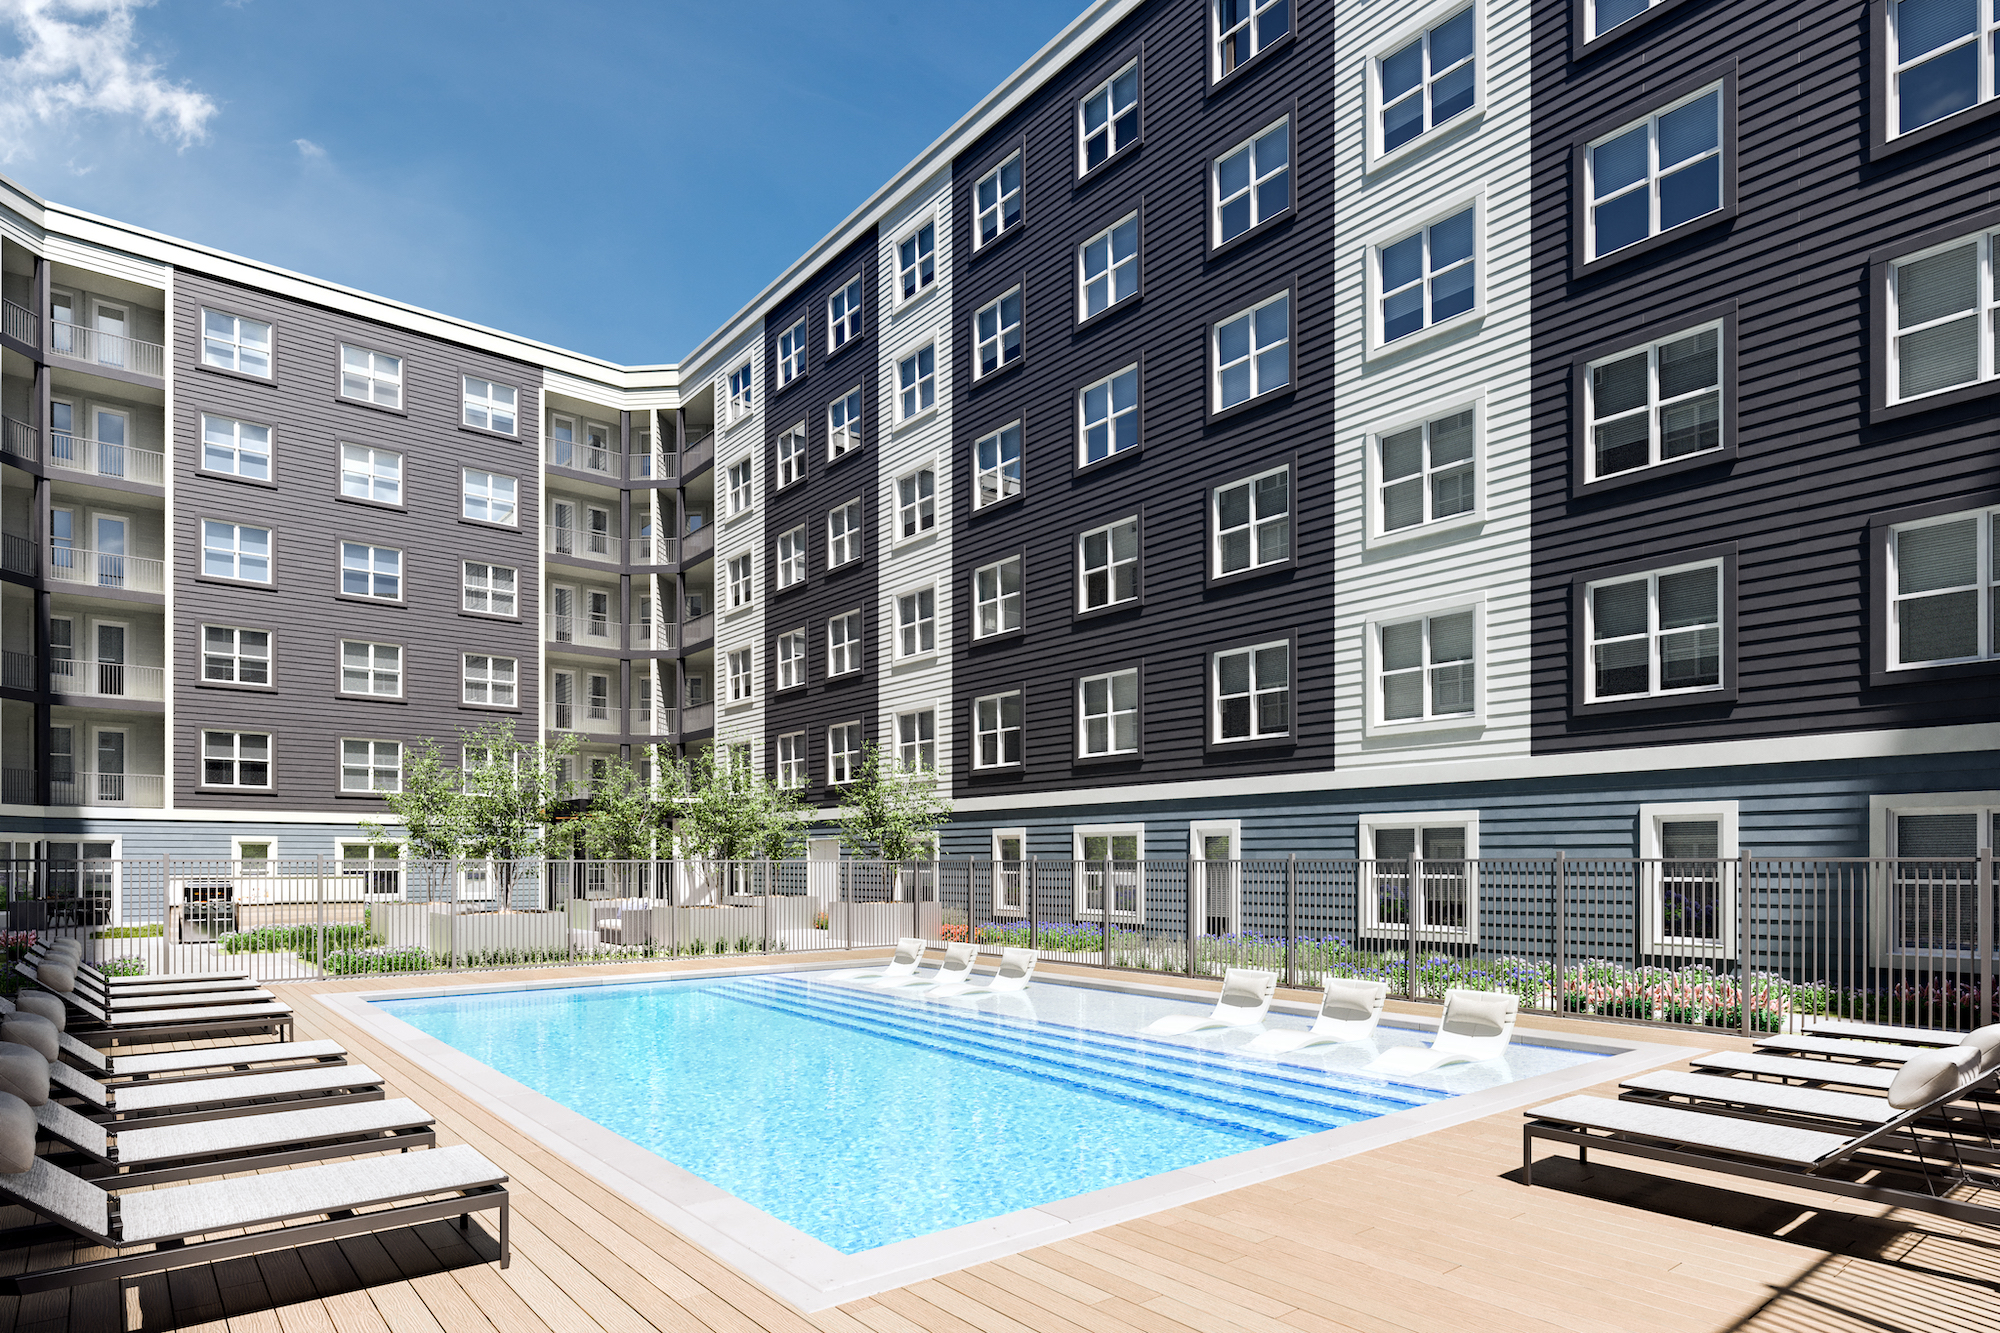 Resort-Style Pool at Our Luxury Apartments in Somerville, MA